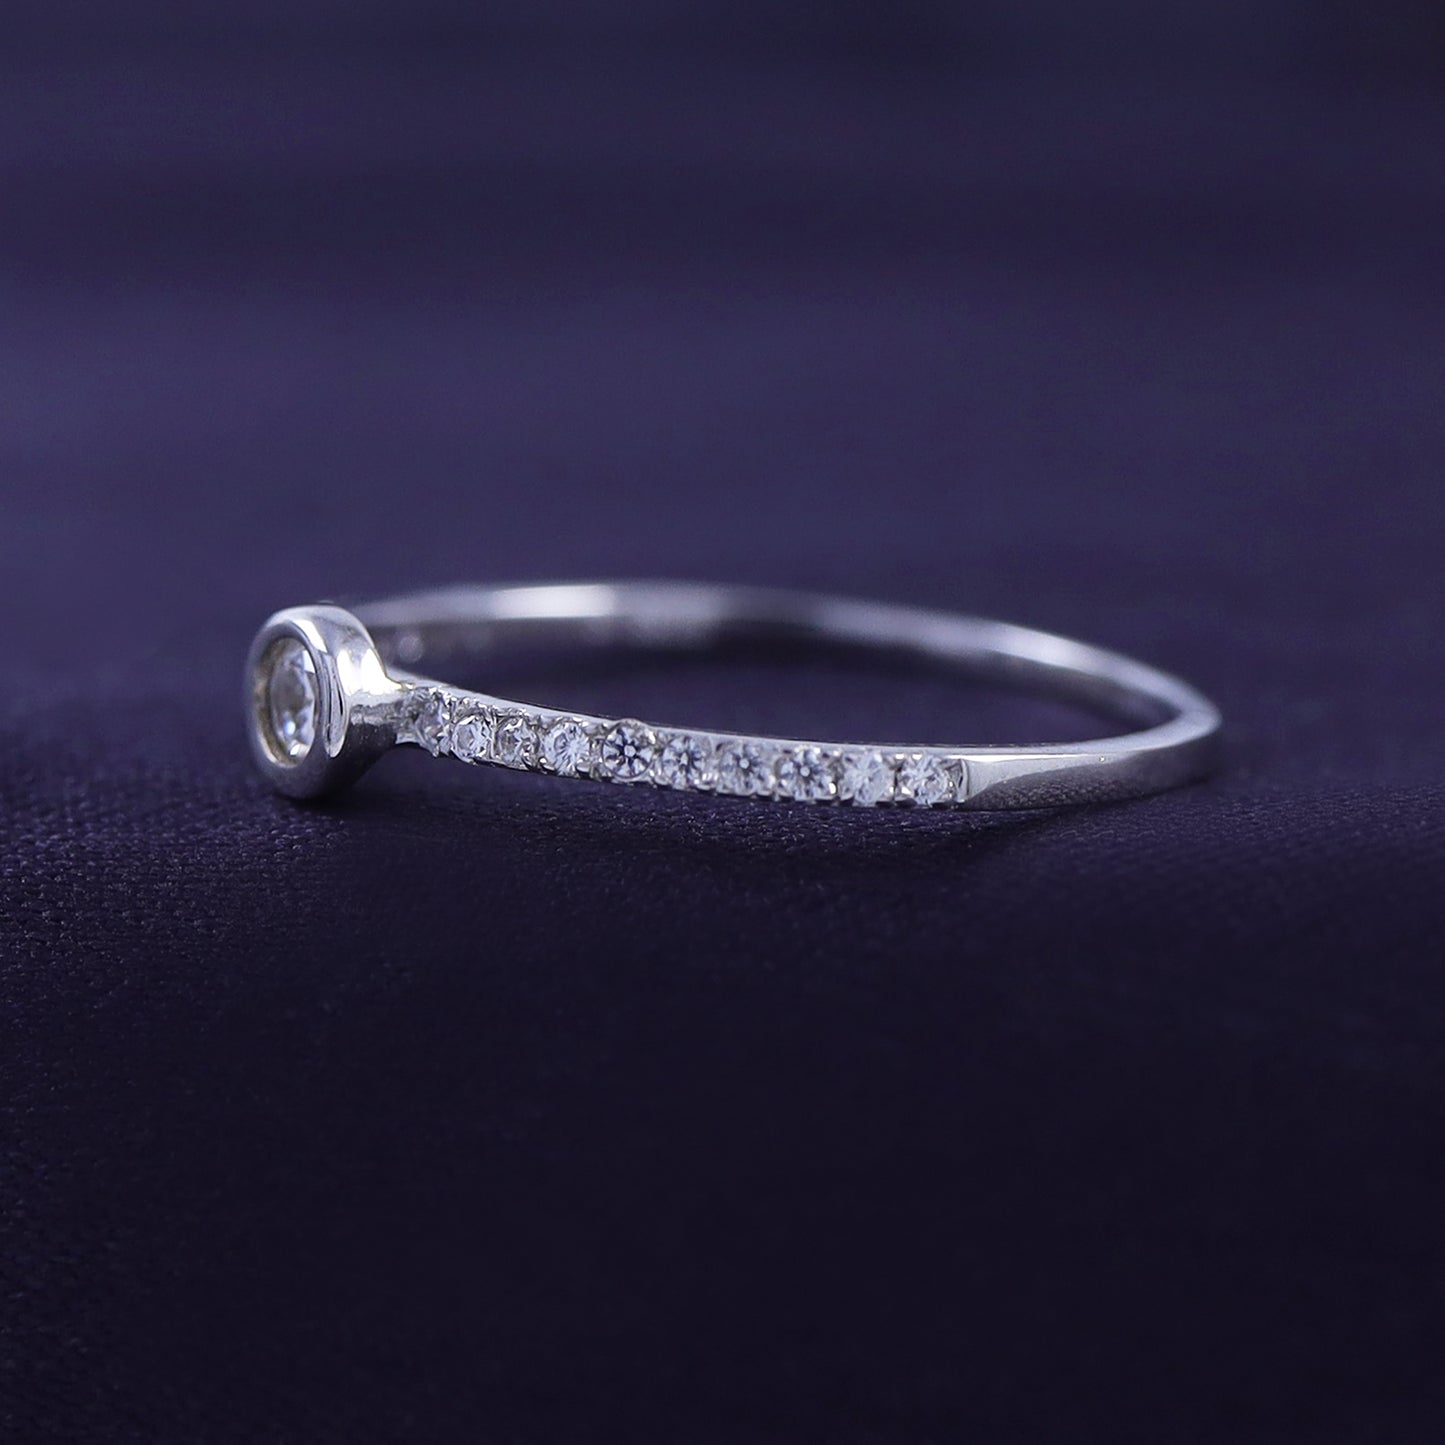 Round White Cubic Zirconia Wedding Cz Band For Women In 925 Sterling Silver